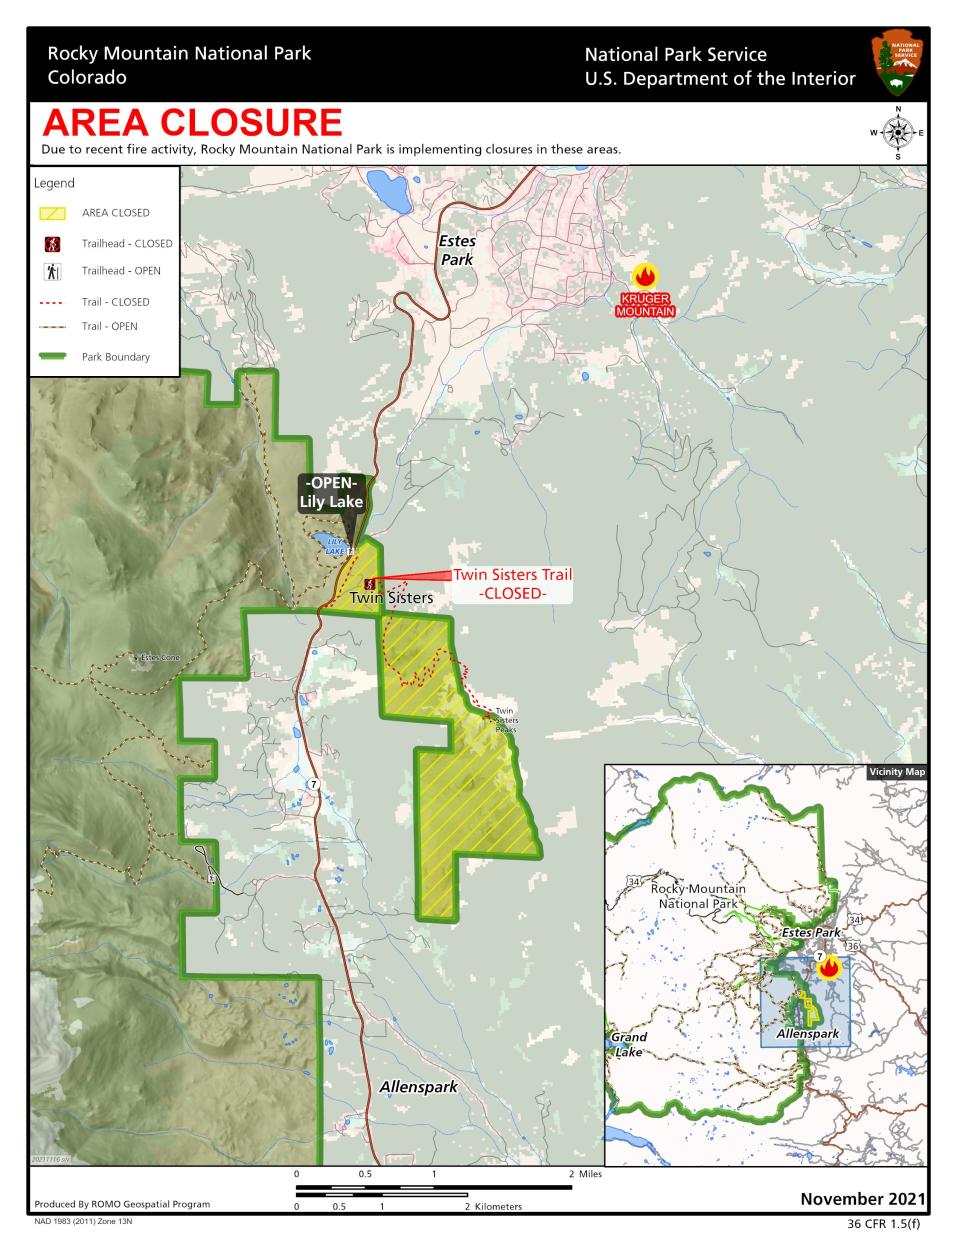 This map details the Twin Sisters area closure brought on by the Kruger Rock fire burning near Estes Park on Tuesday, Nov. 16, 2021.